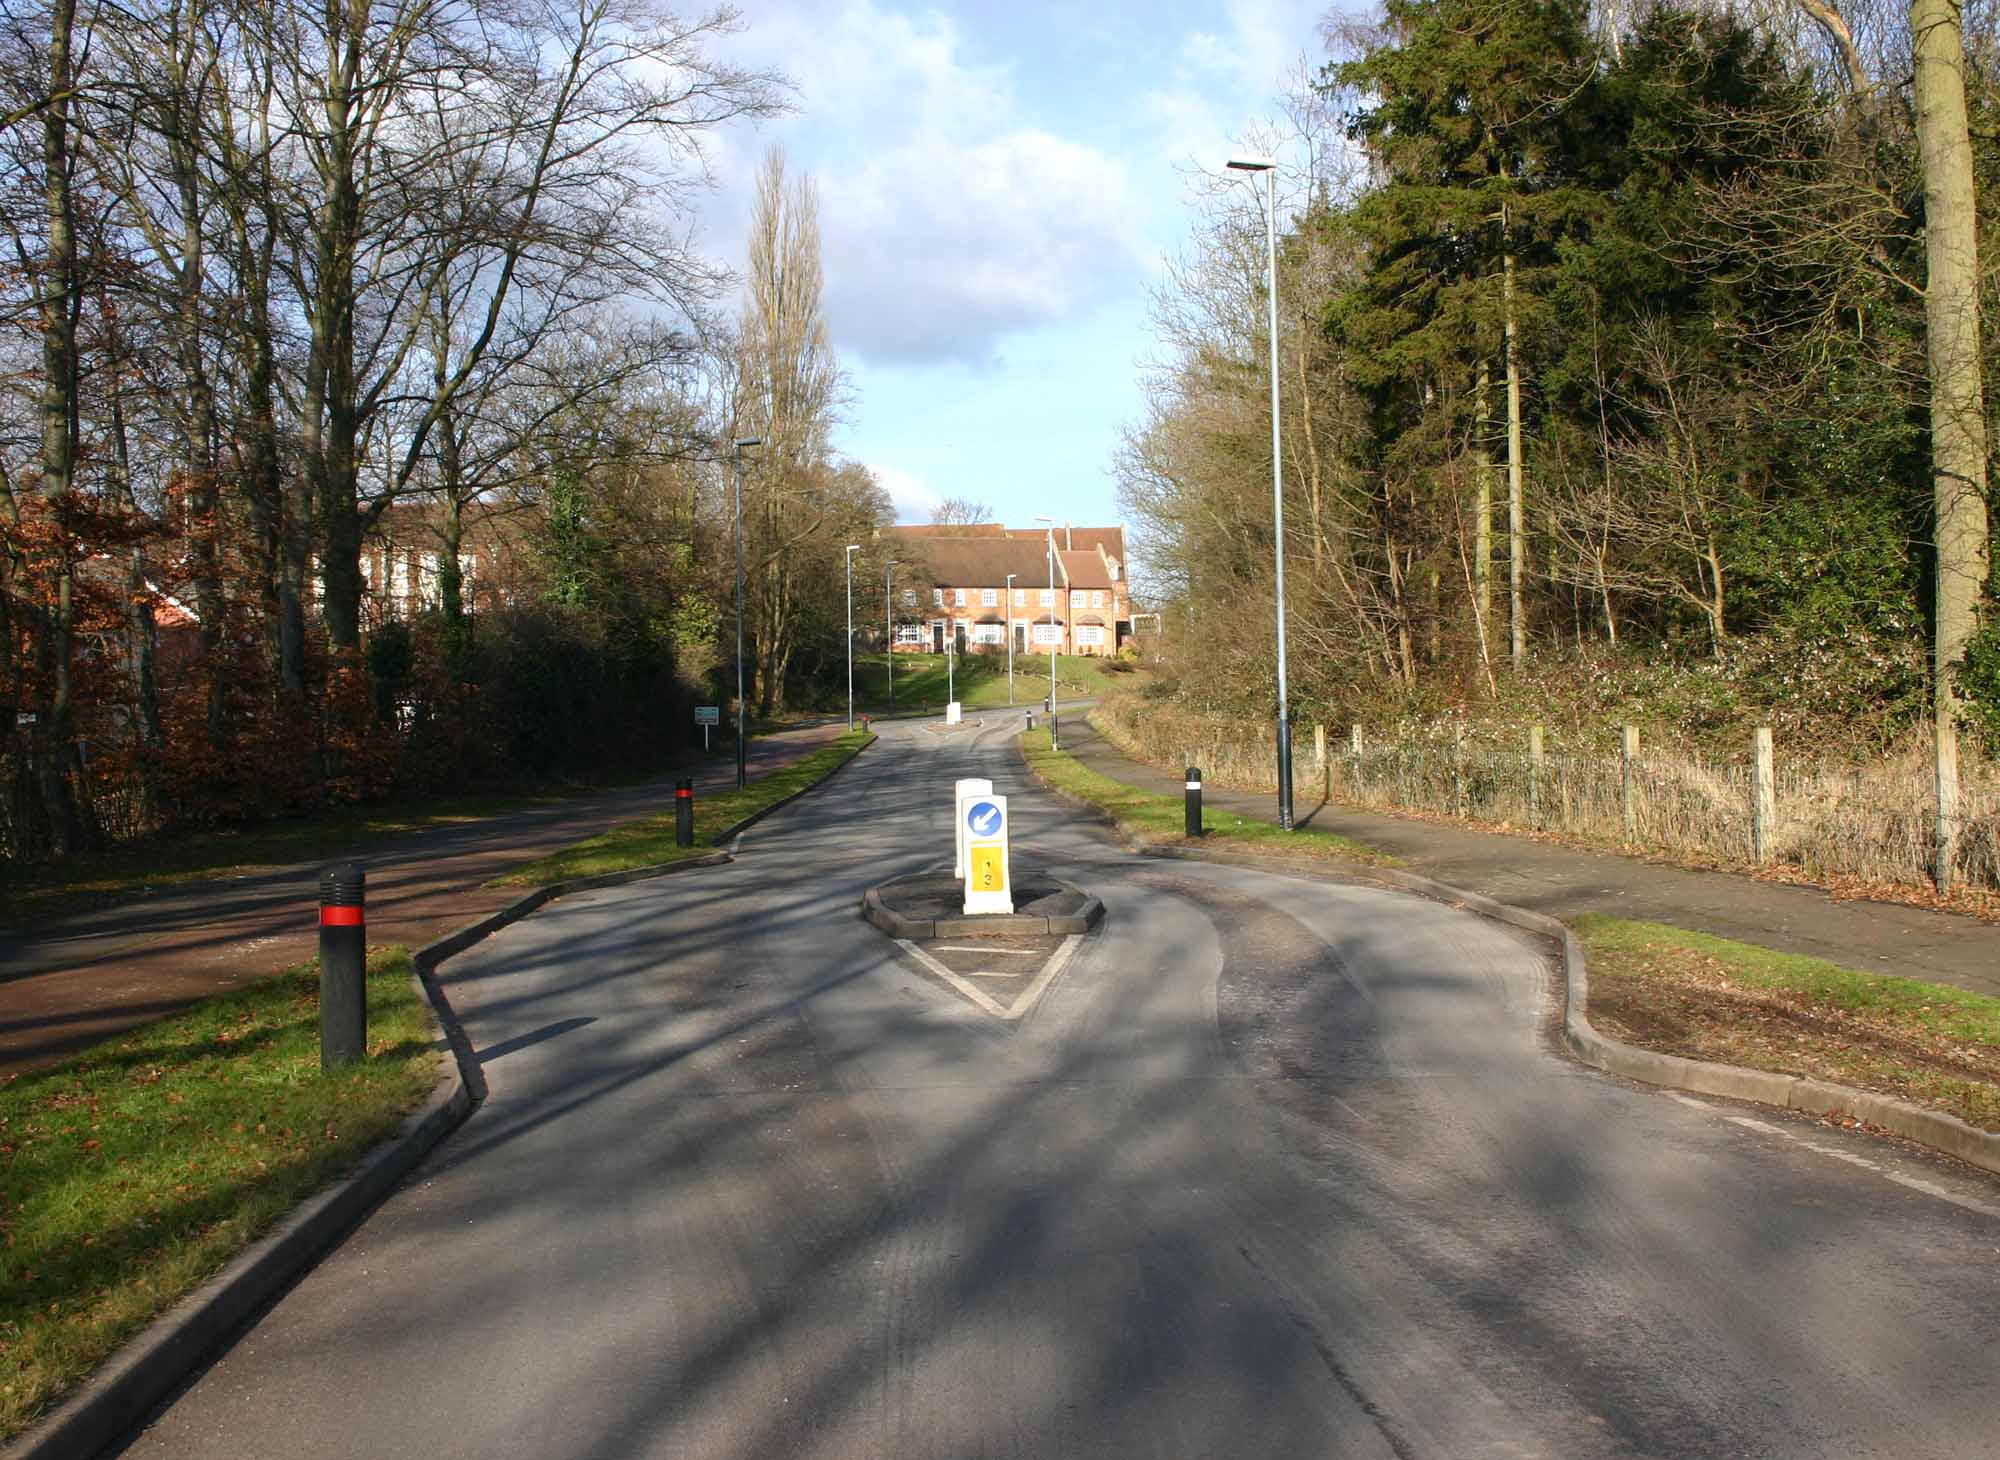 File:Traffic calming chicane on Charingworth Drive - geograph.org.uk ...